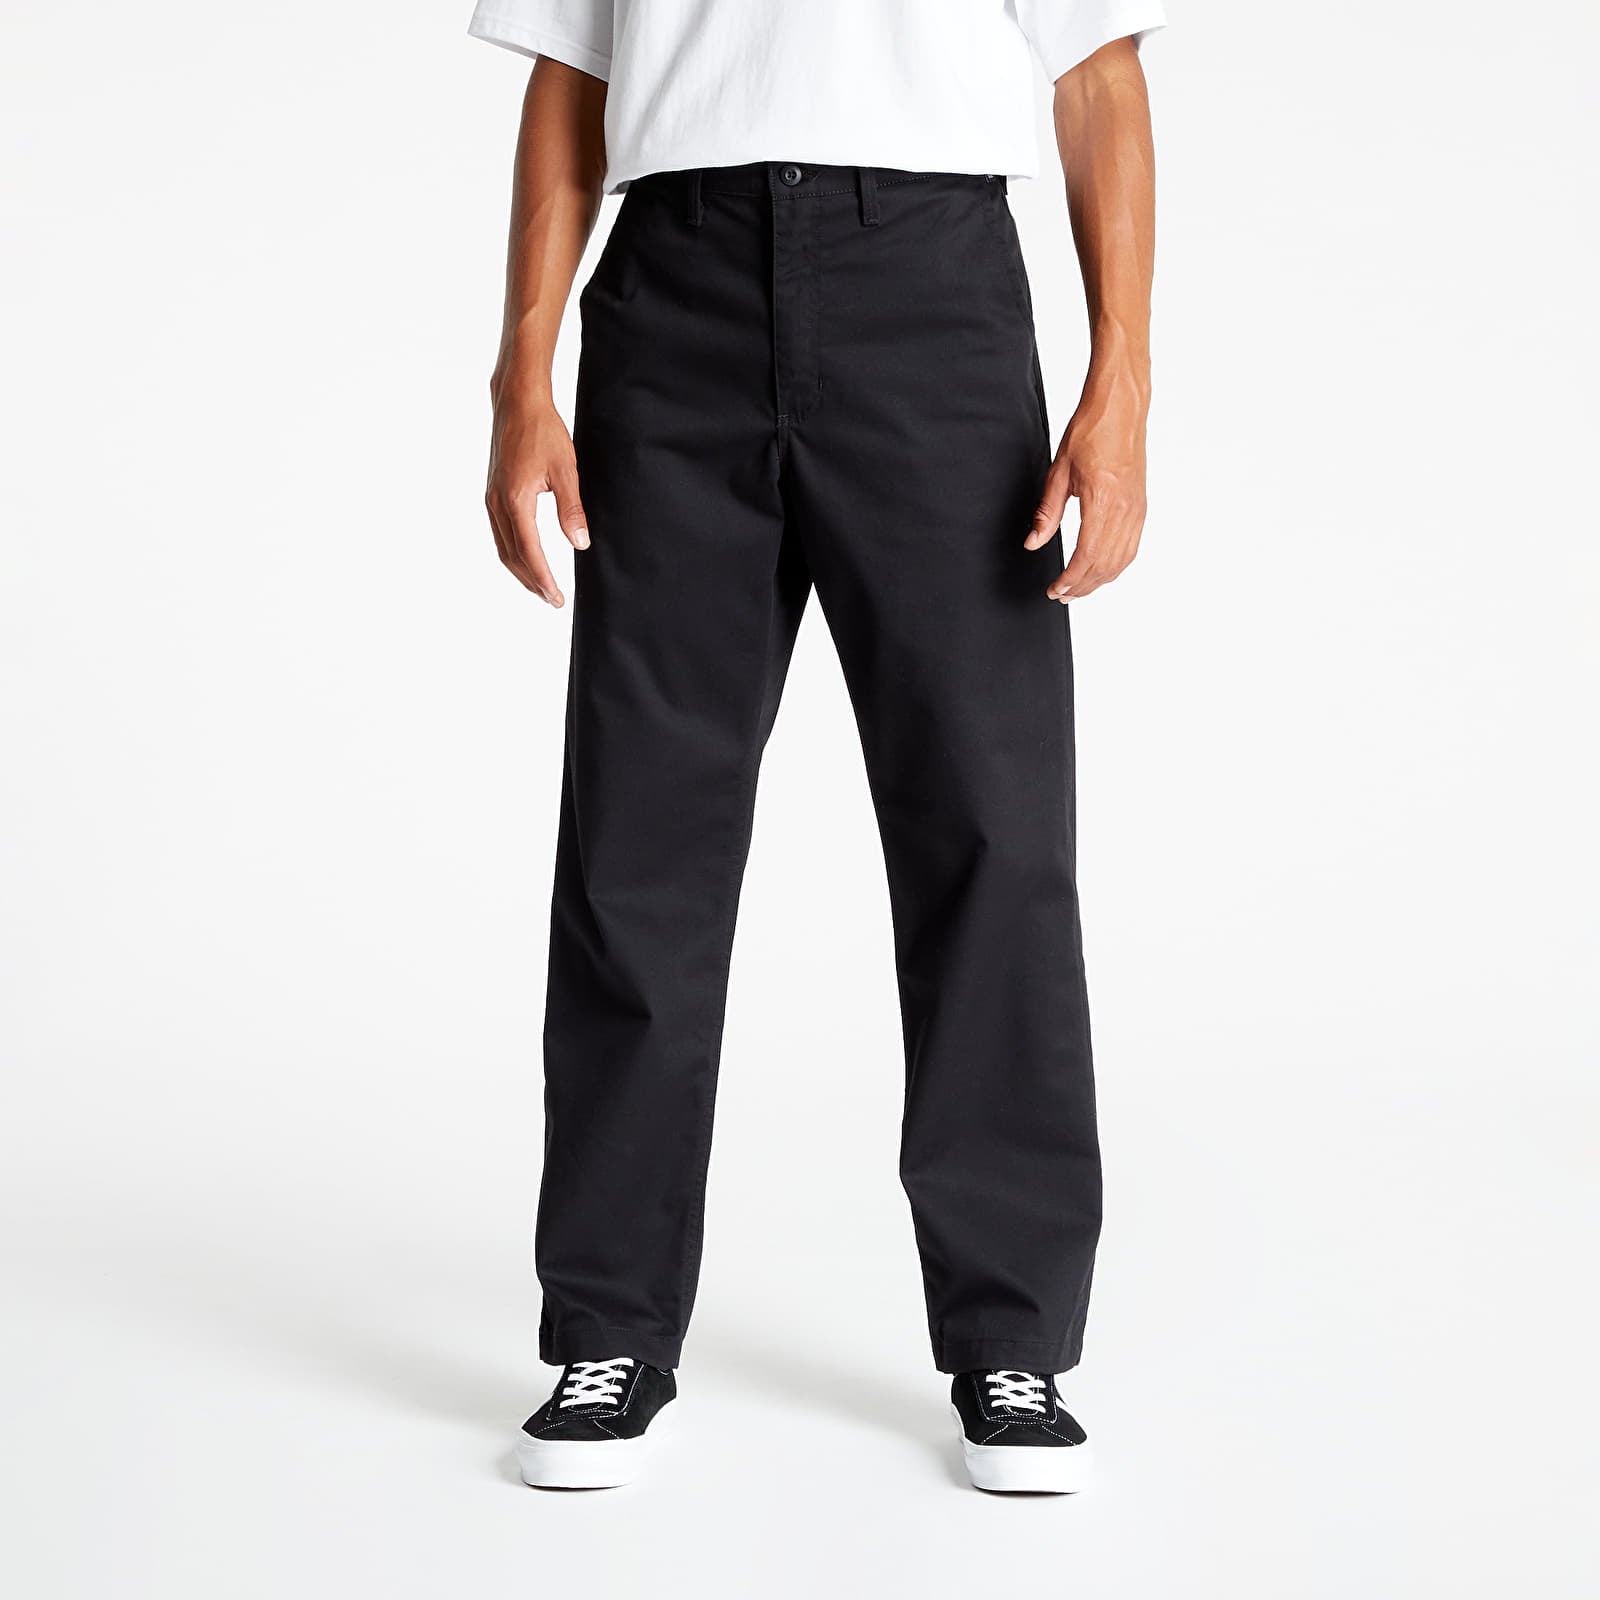 Authentic Chino Loose Tapered Pant*